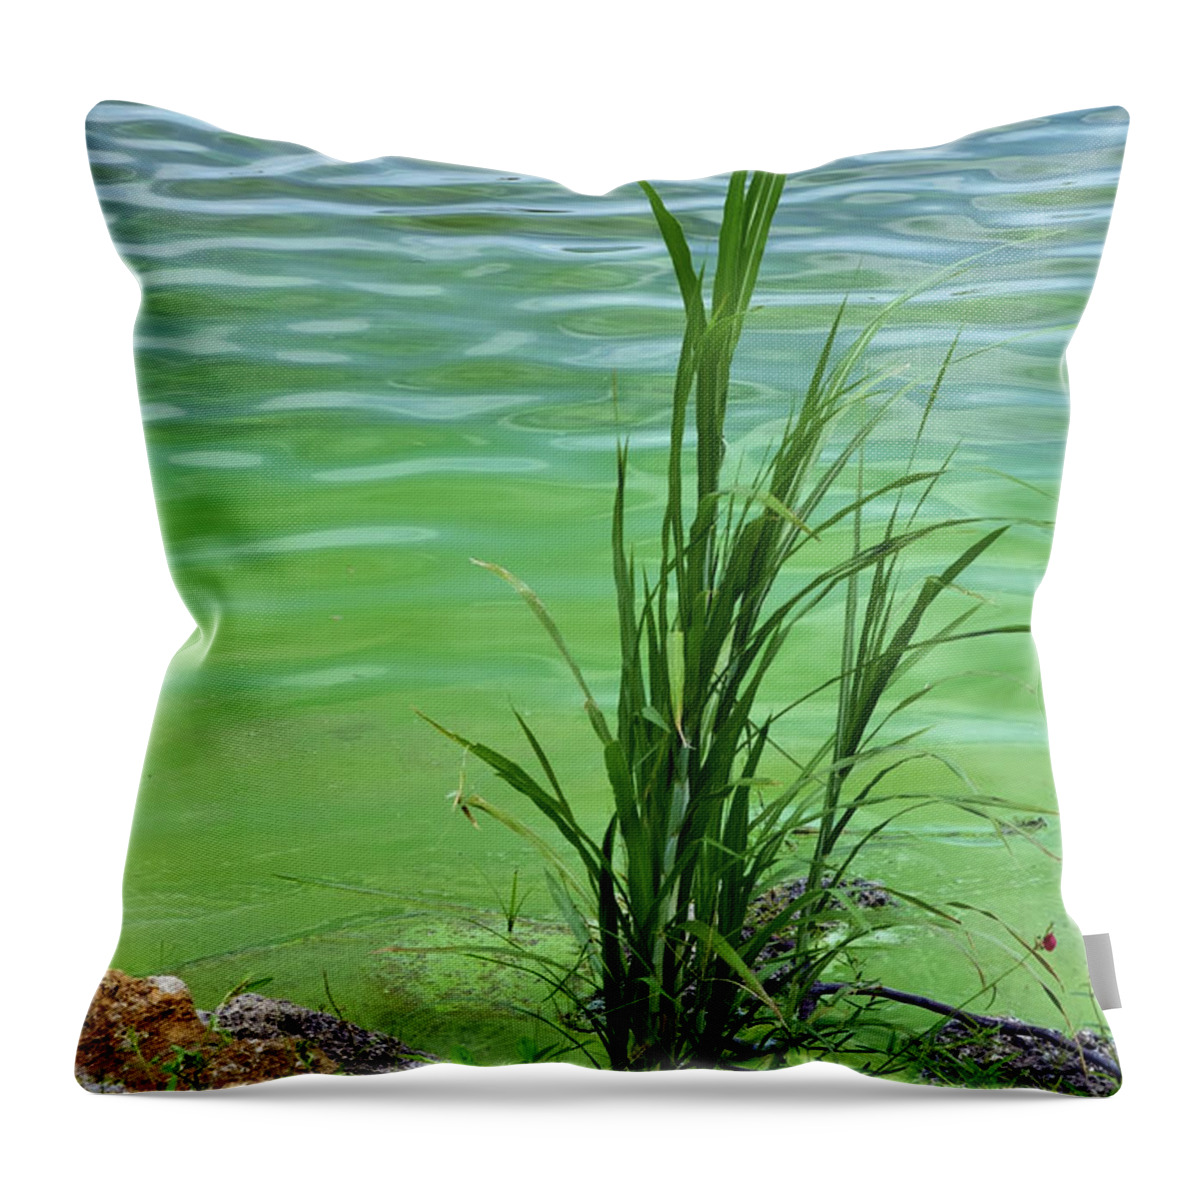 Algal Bloom Throw Pillow featuring the photograph Grass And Cyanobacteria, Fl by Mary Beth Angelo